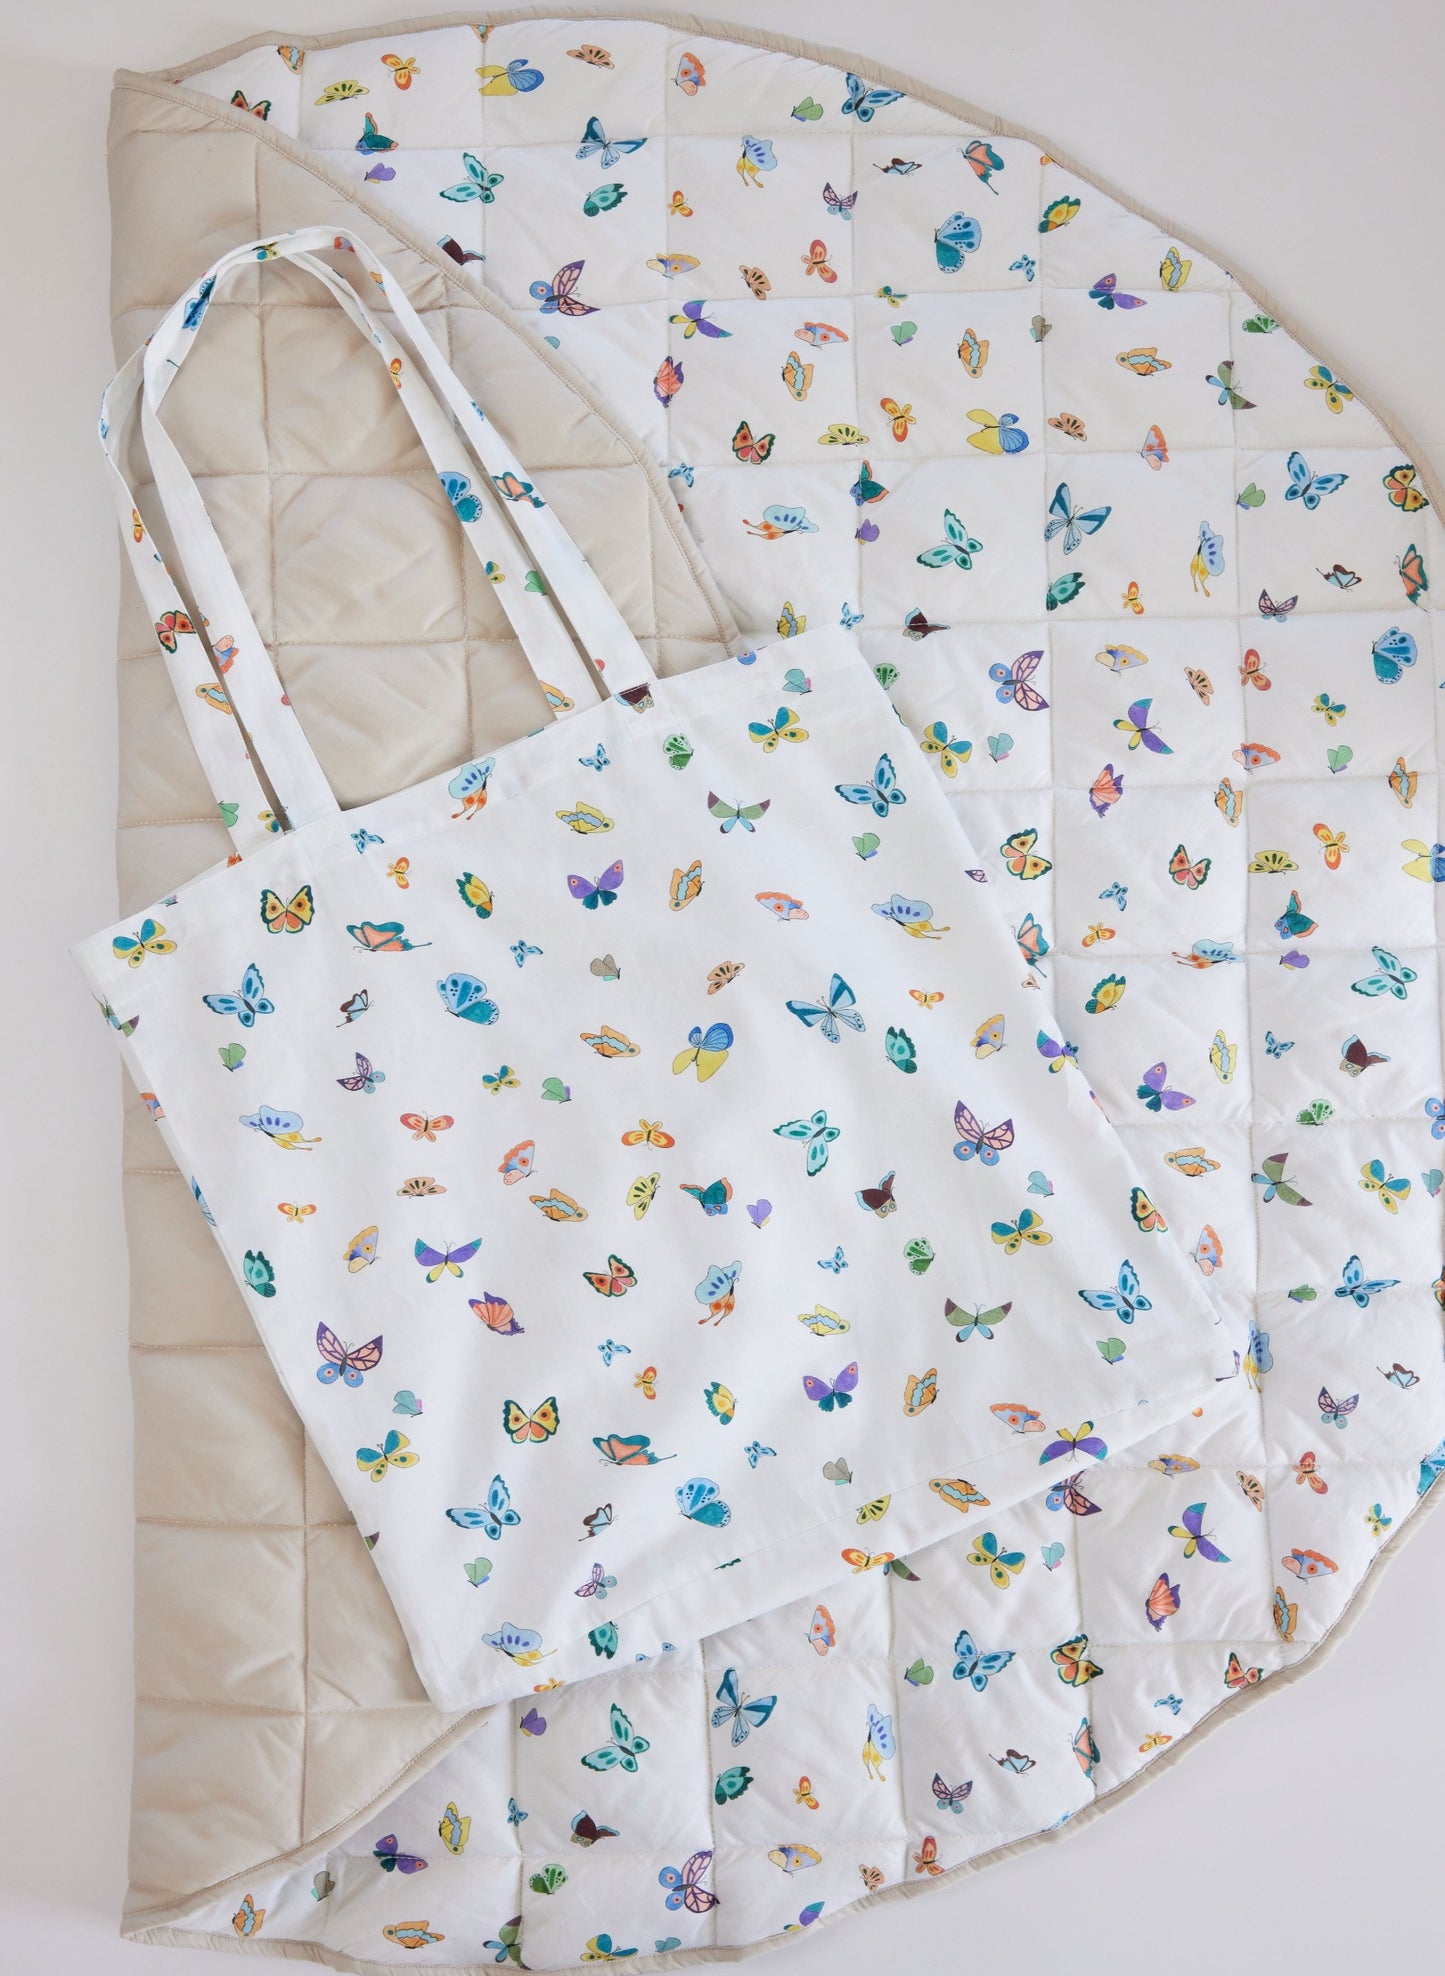 Madam Butterfly Playmat and Tote